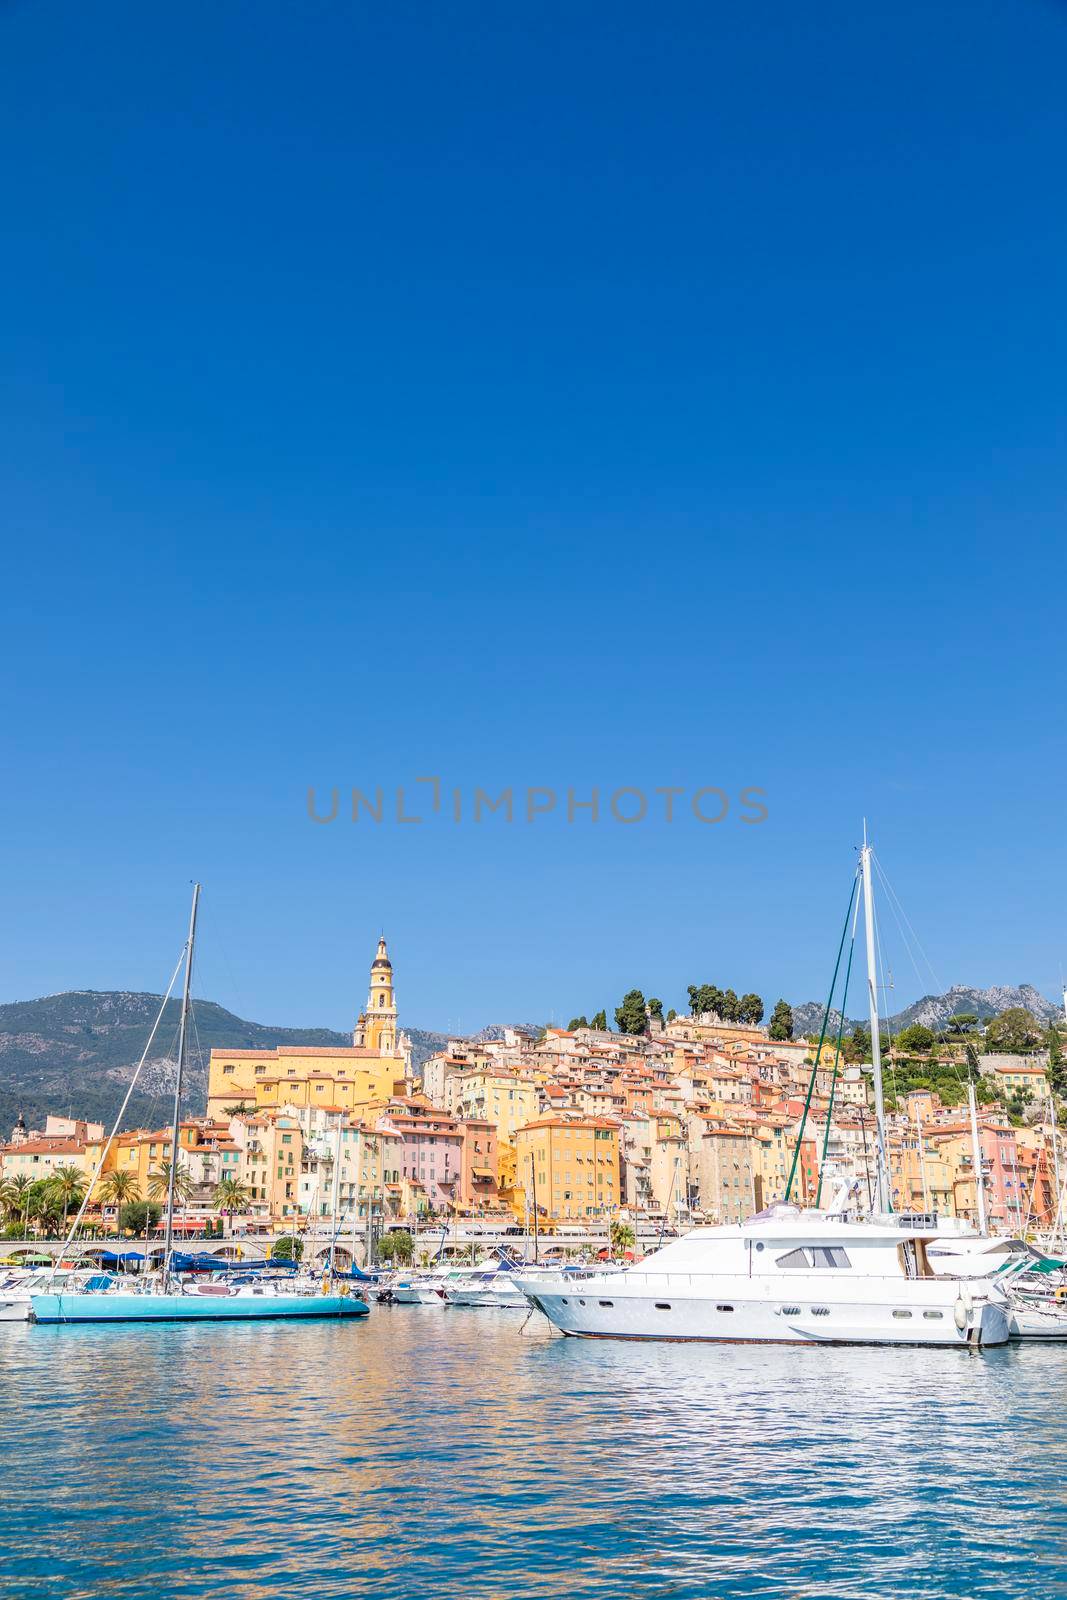 Menton, France - circa August 2021: view of the French Riviera, named the Coast Azur, located in the South of France.